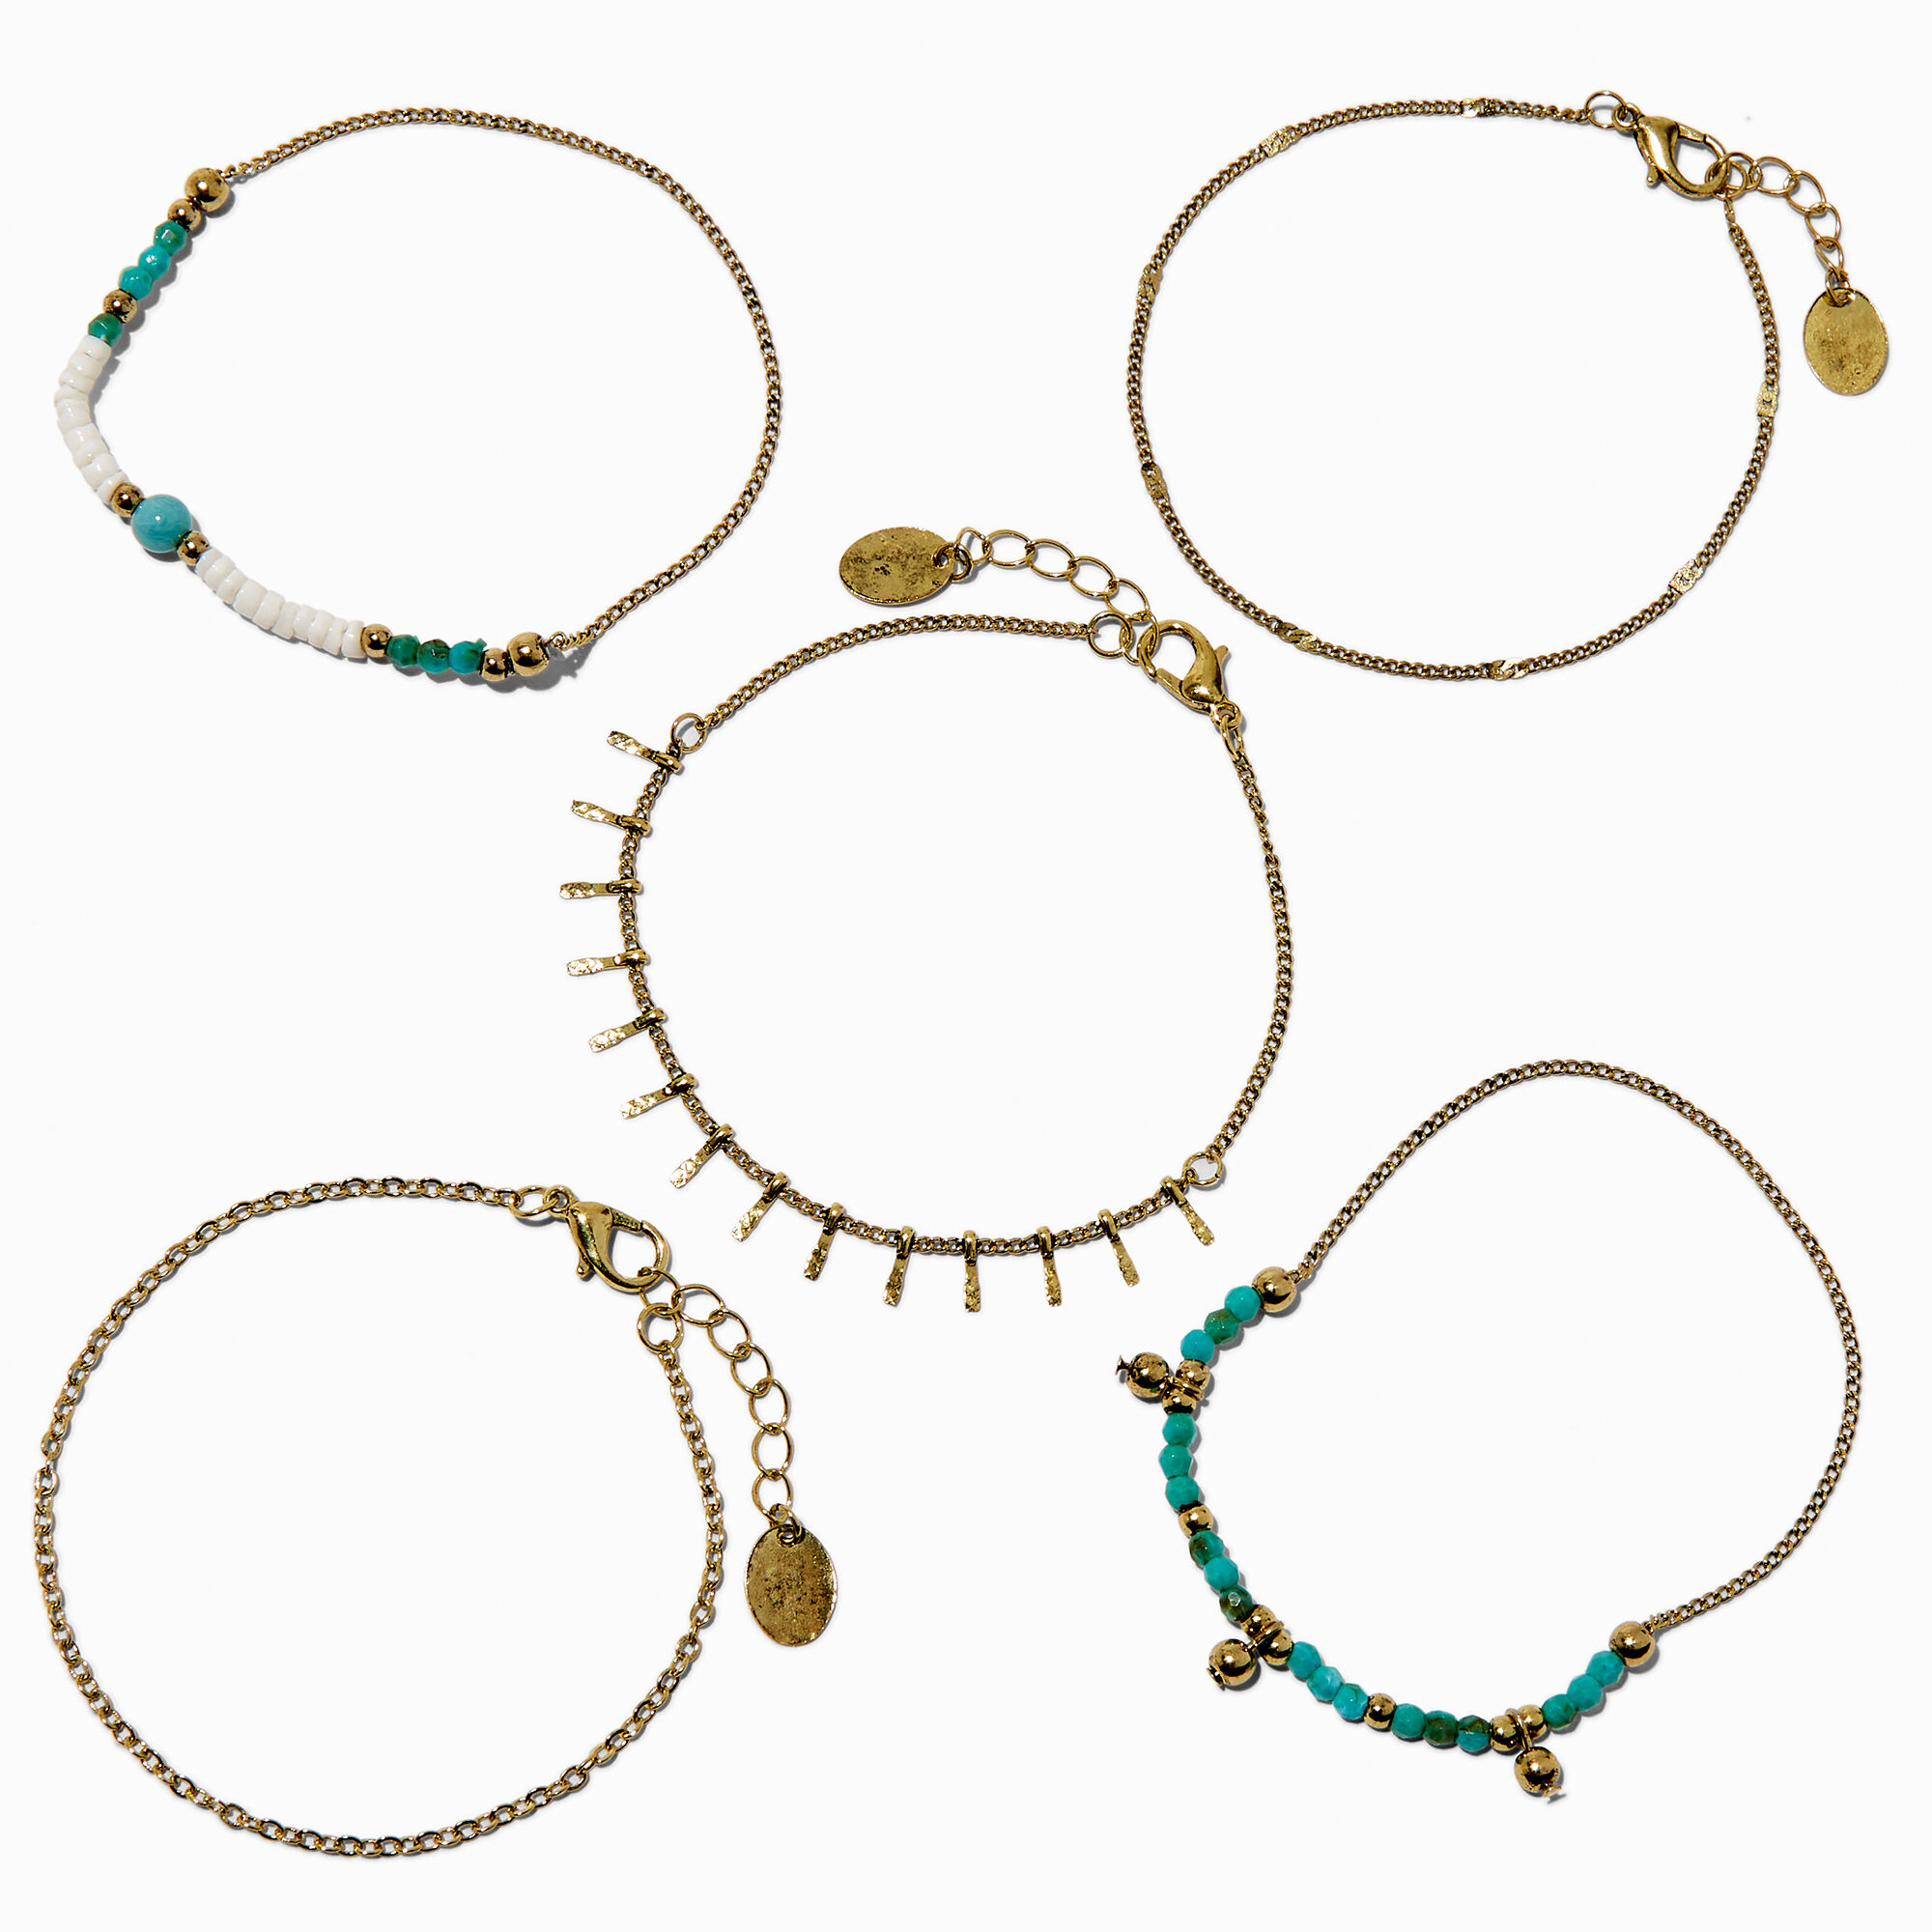 View Claires Beaded GoldTone Mixed Bracelet Set 5 Pack Turquoise information